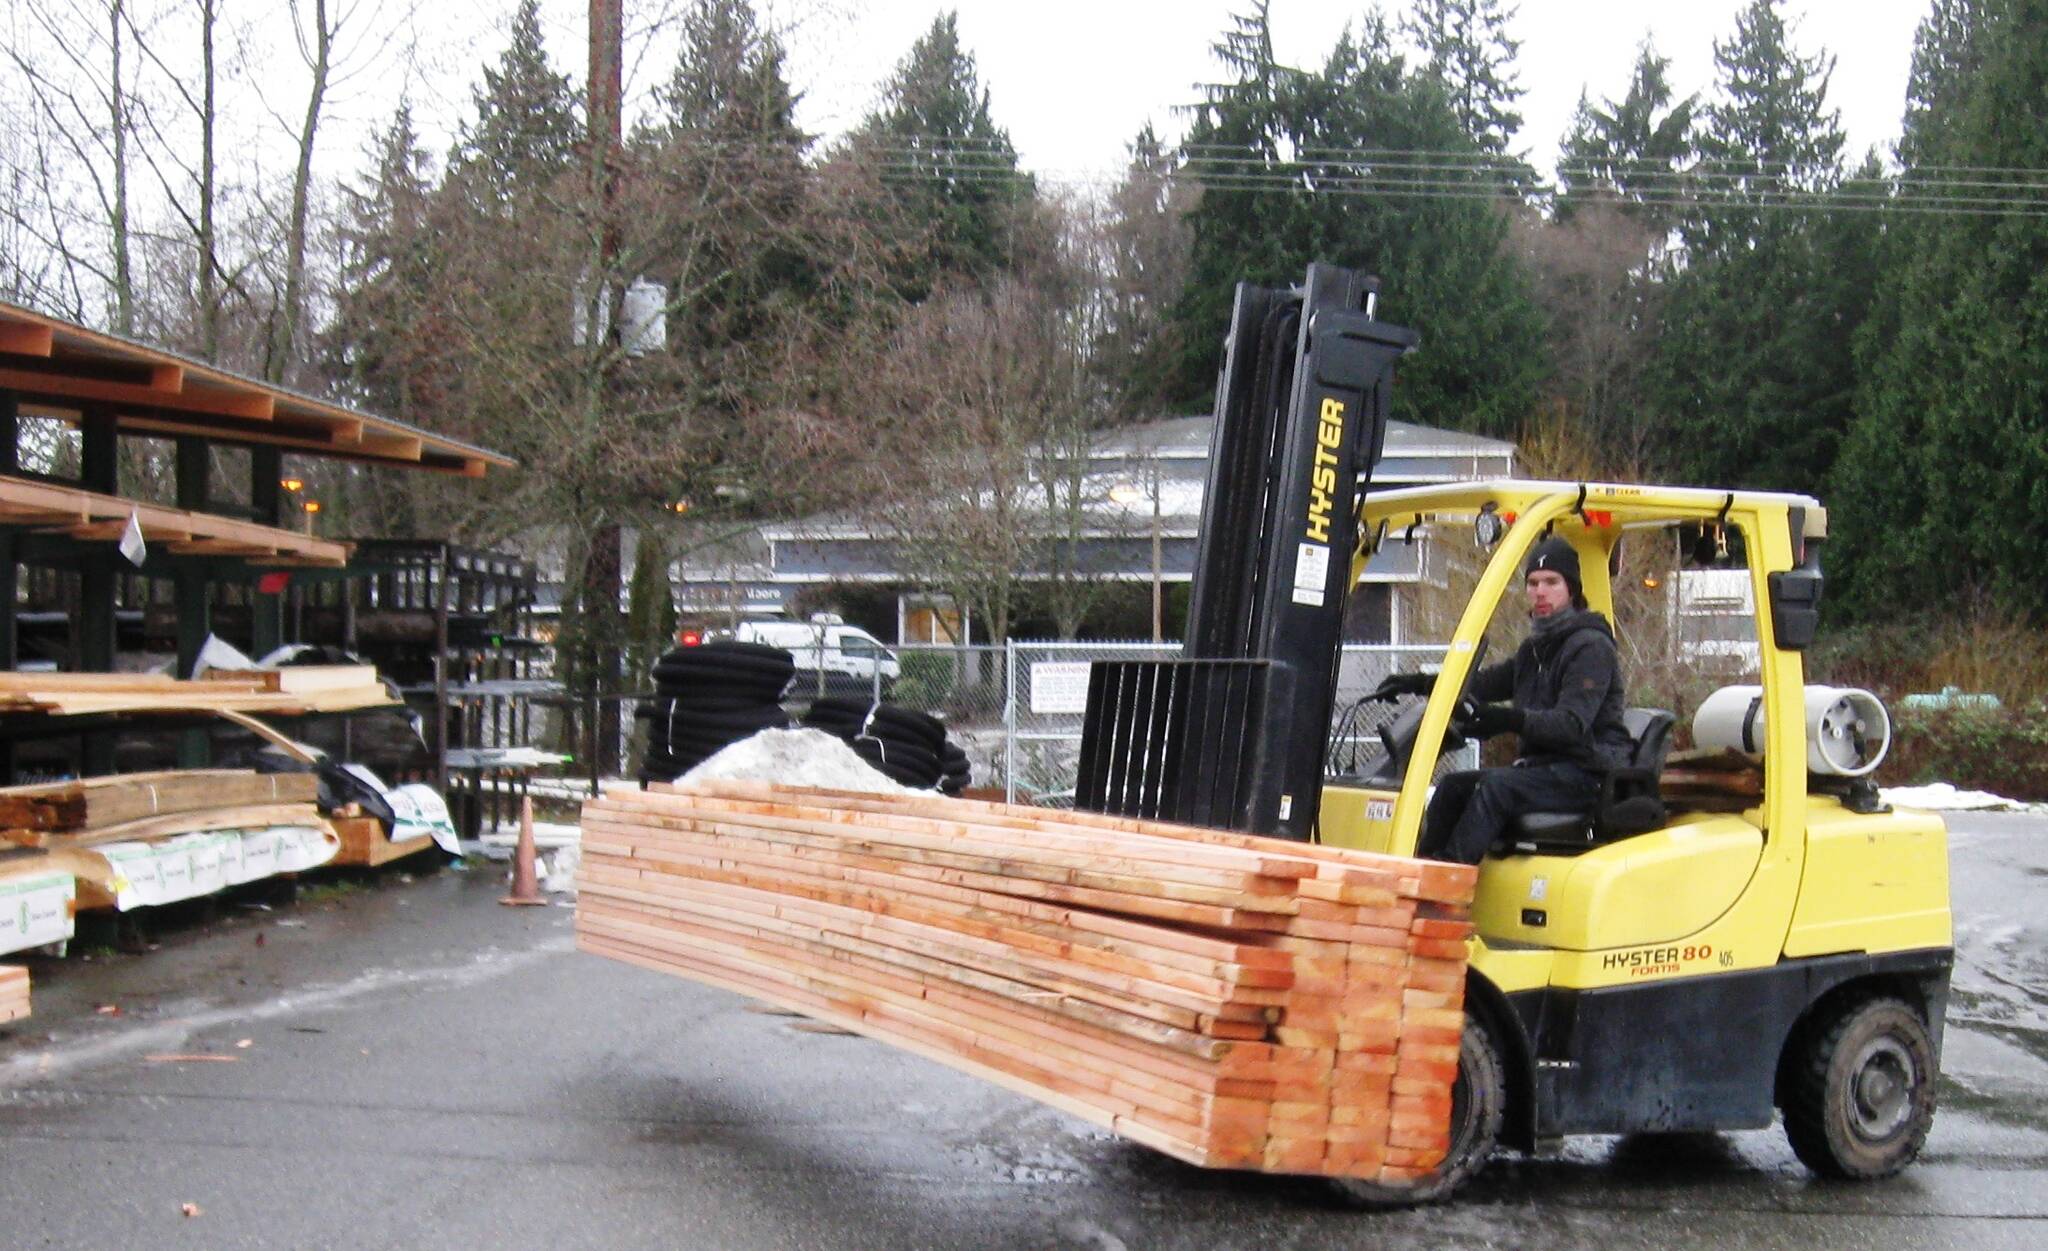 Yard attendant Brady Mullins drives a forklift to load 2x6 boards at Frontier Building Supply in Freeland. With high demand and diminished supply, lumber costs nearly twice as much now as two months ago. (Photo by Dave Felice)